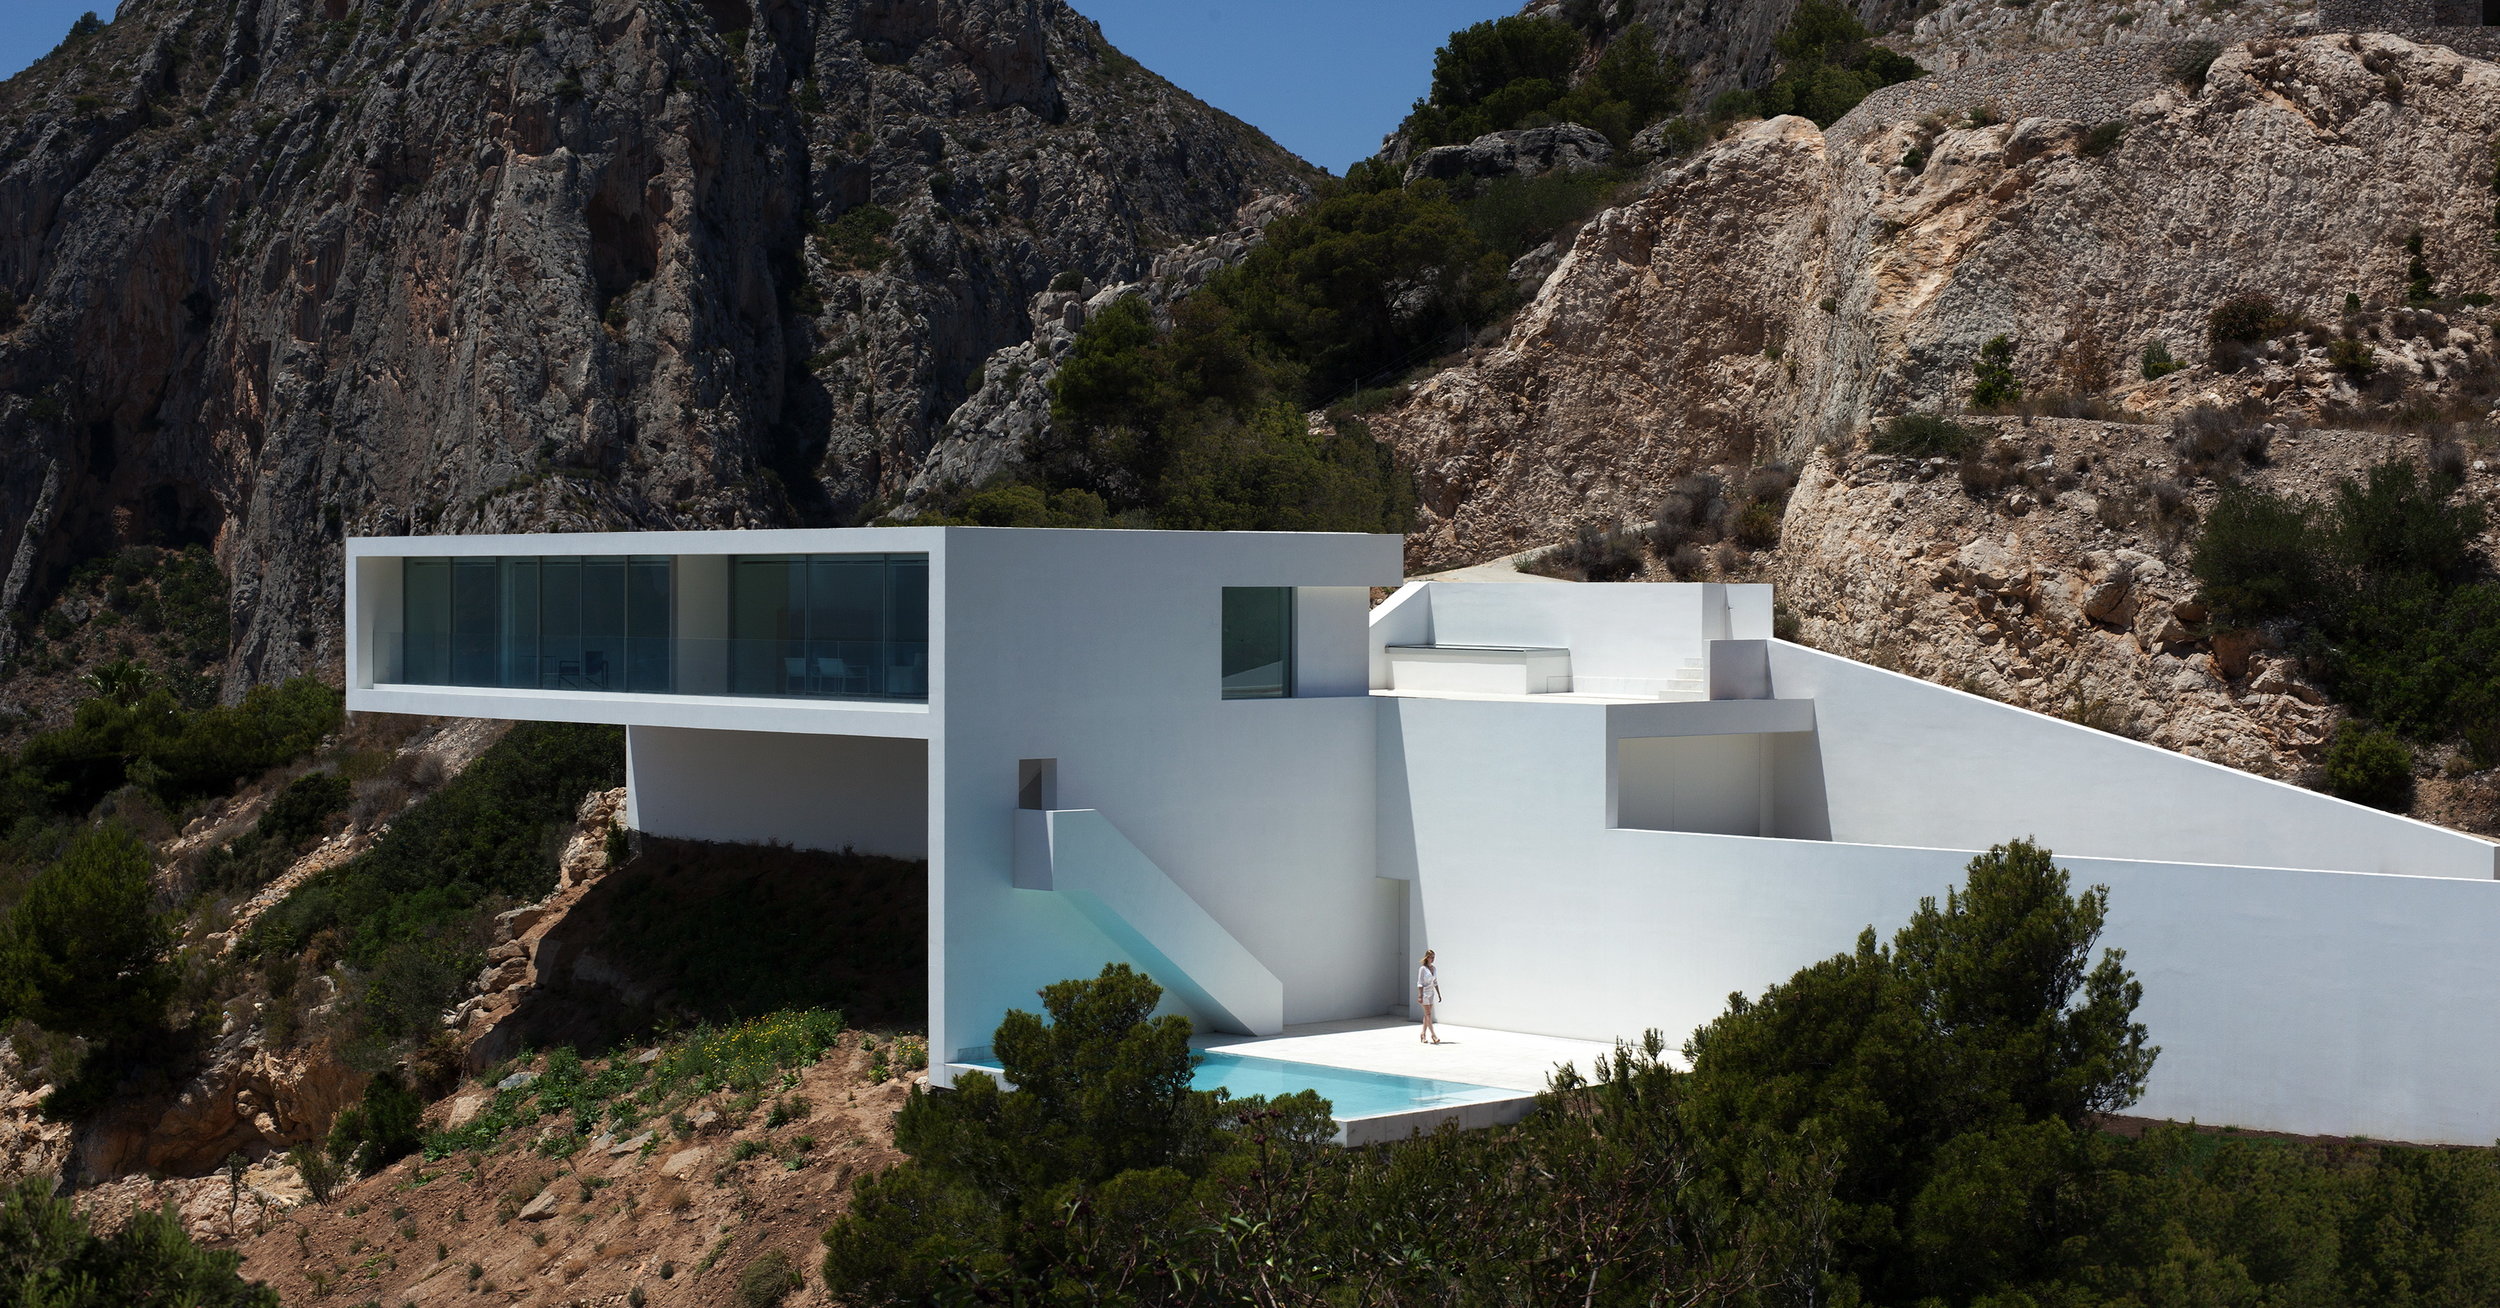 FRAN SILVESTRE ARQUITECTOS VALENCIA - HOUSE ON THE CLIFF -  IMG ARQUITECTURA - 32.jpg